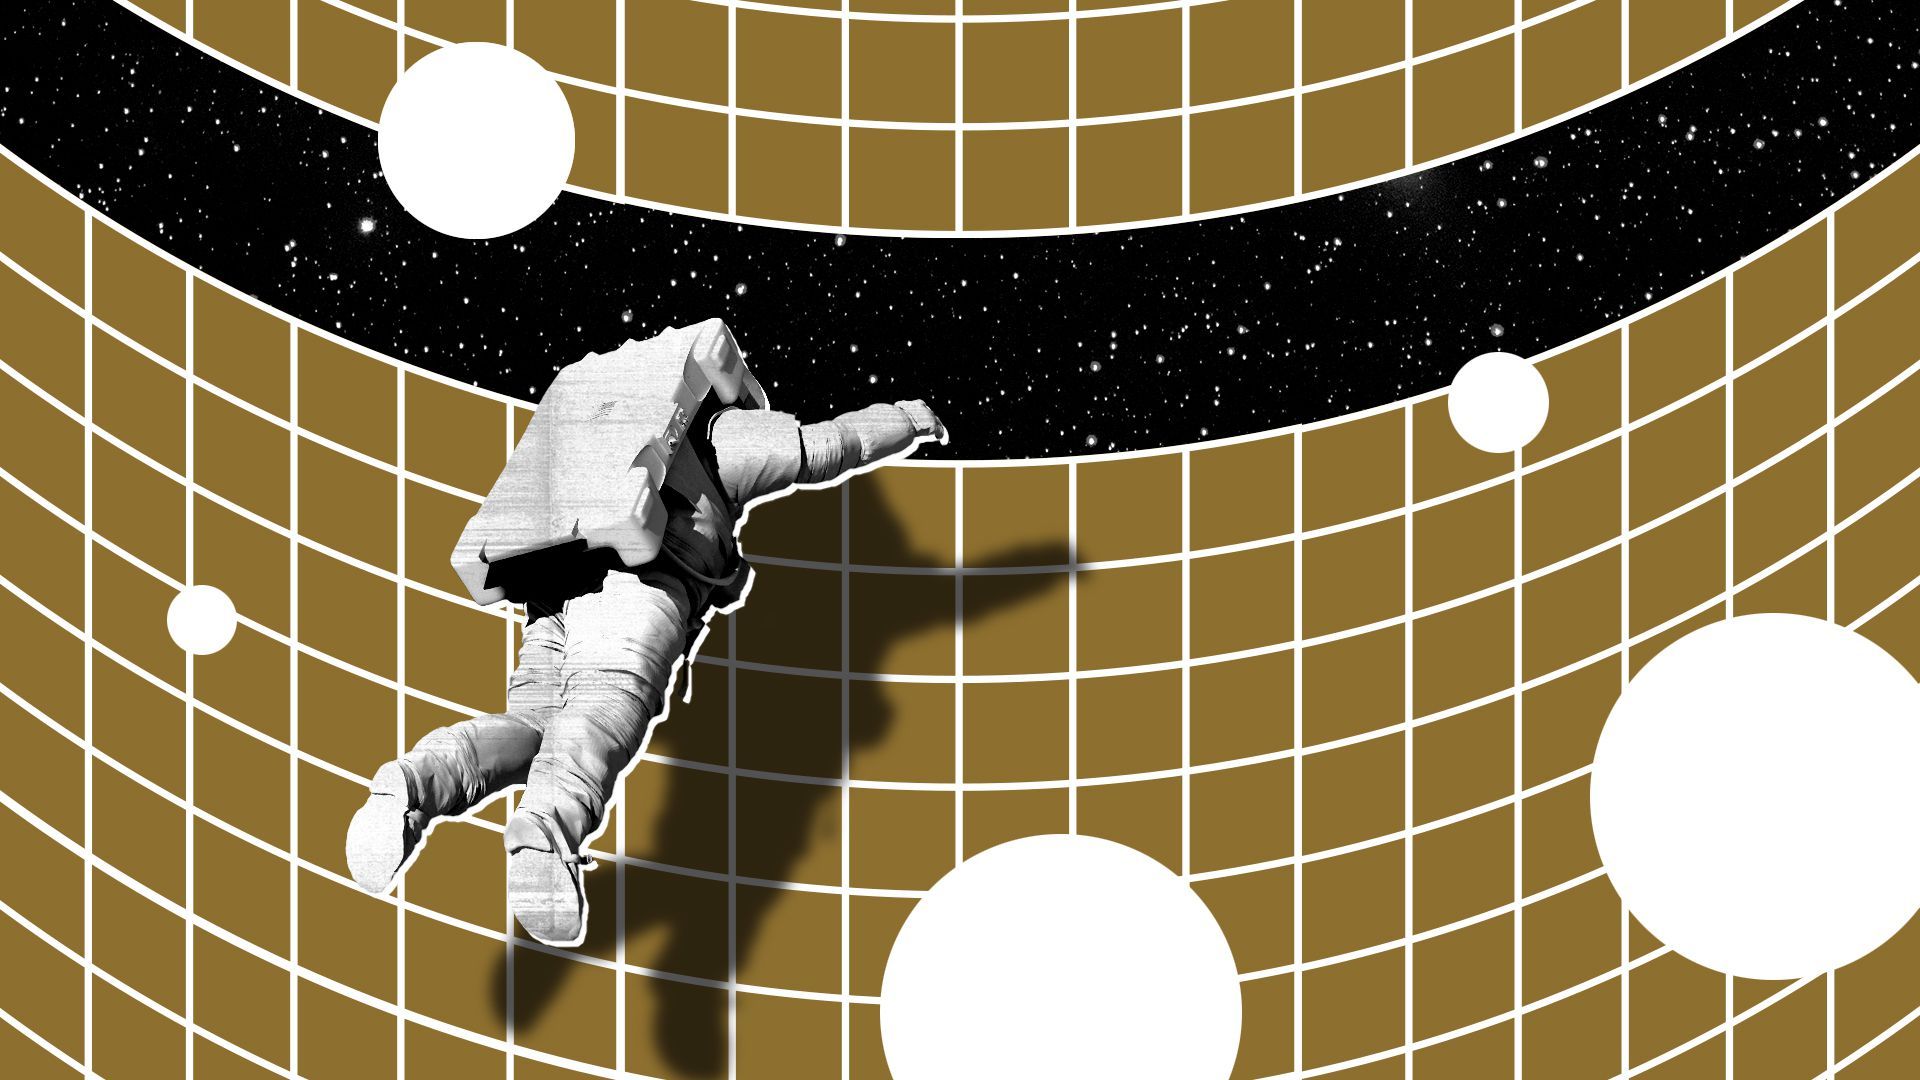 Illustrated collage of an astronaut looking over a gridded vortex wall into space.